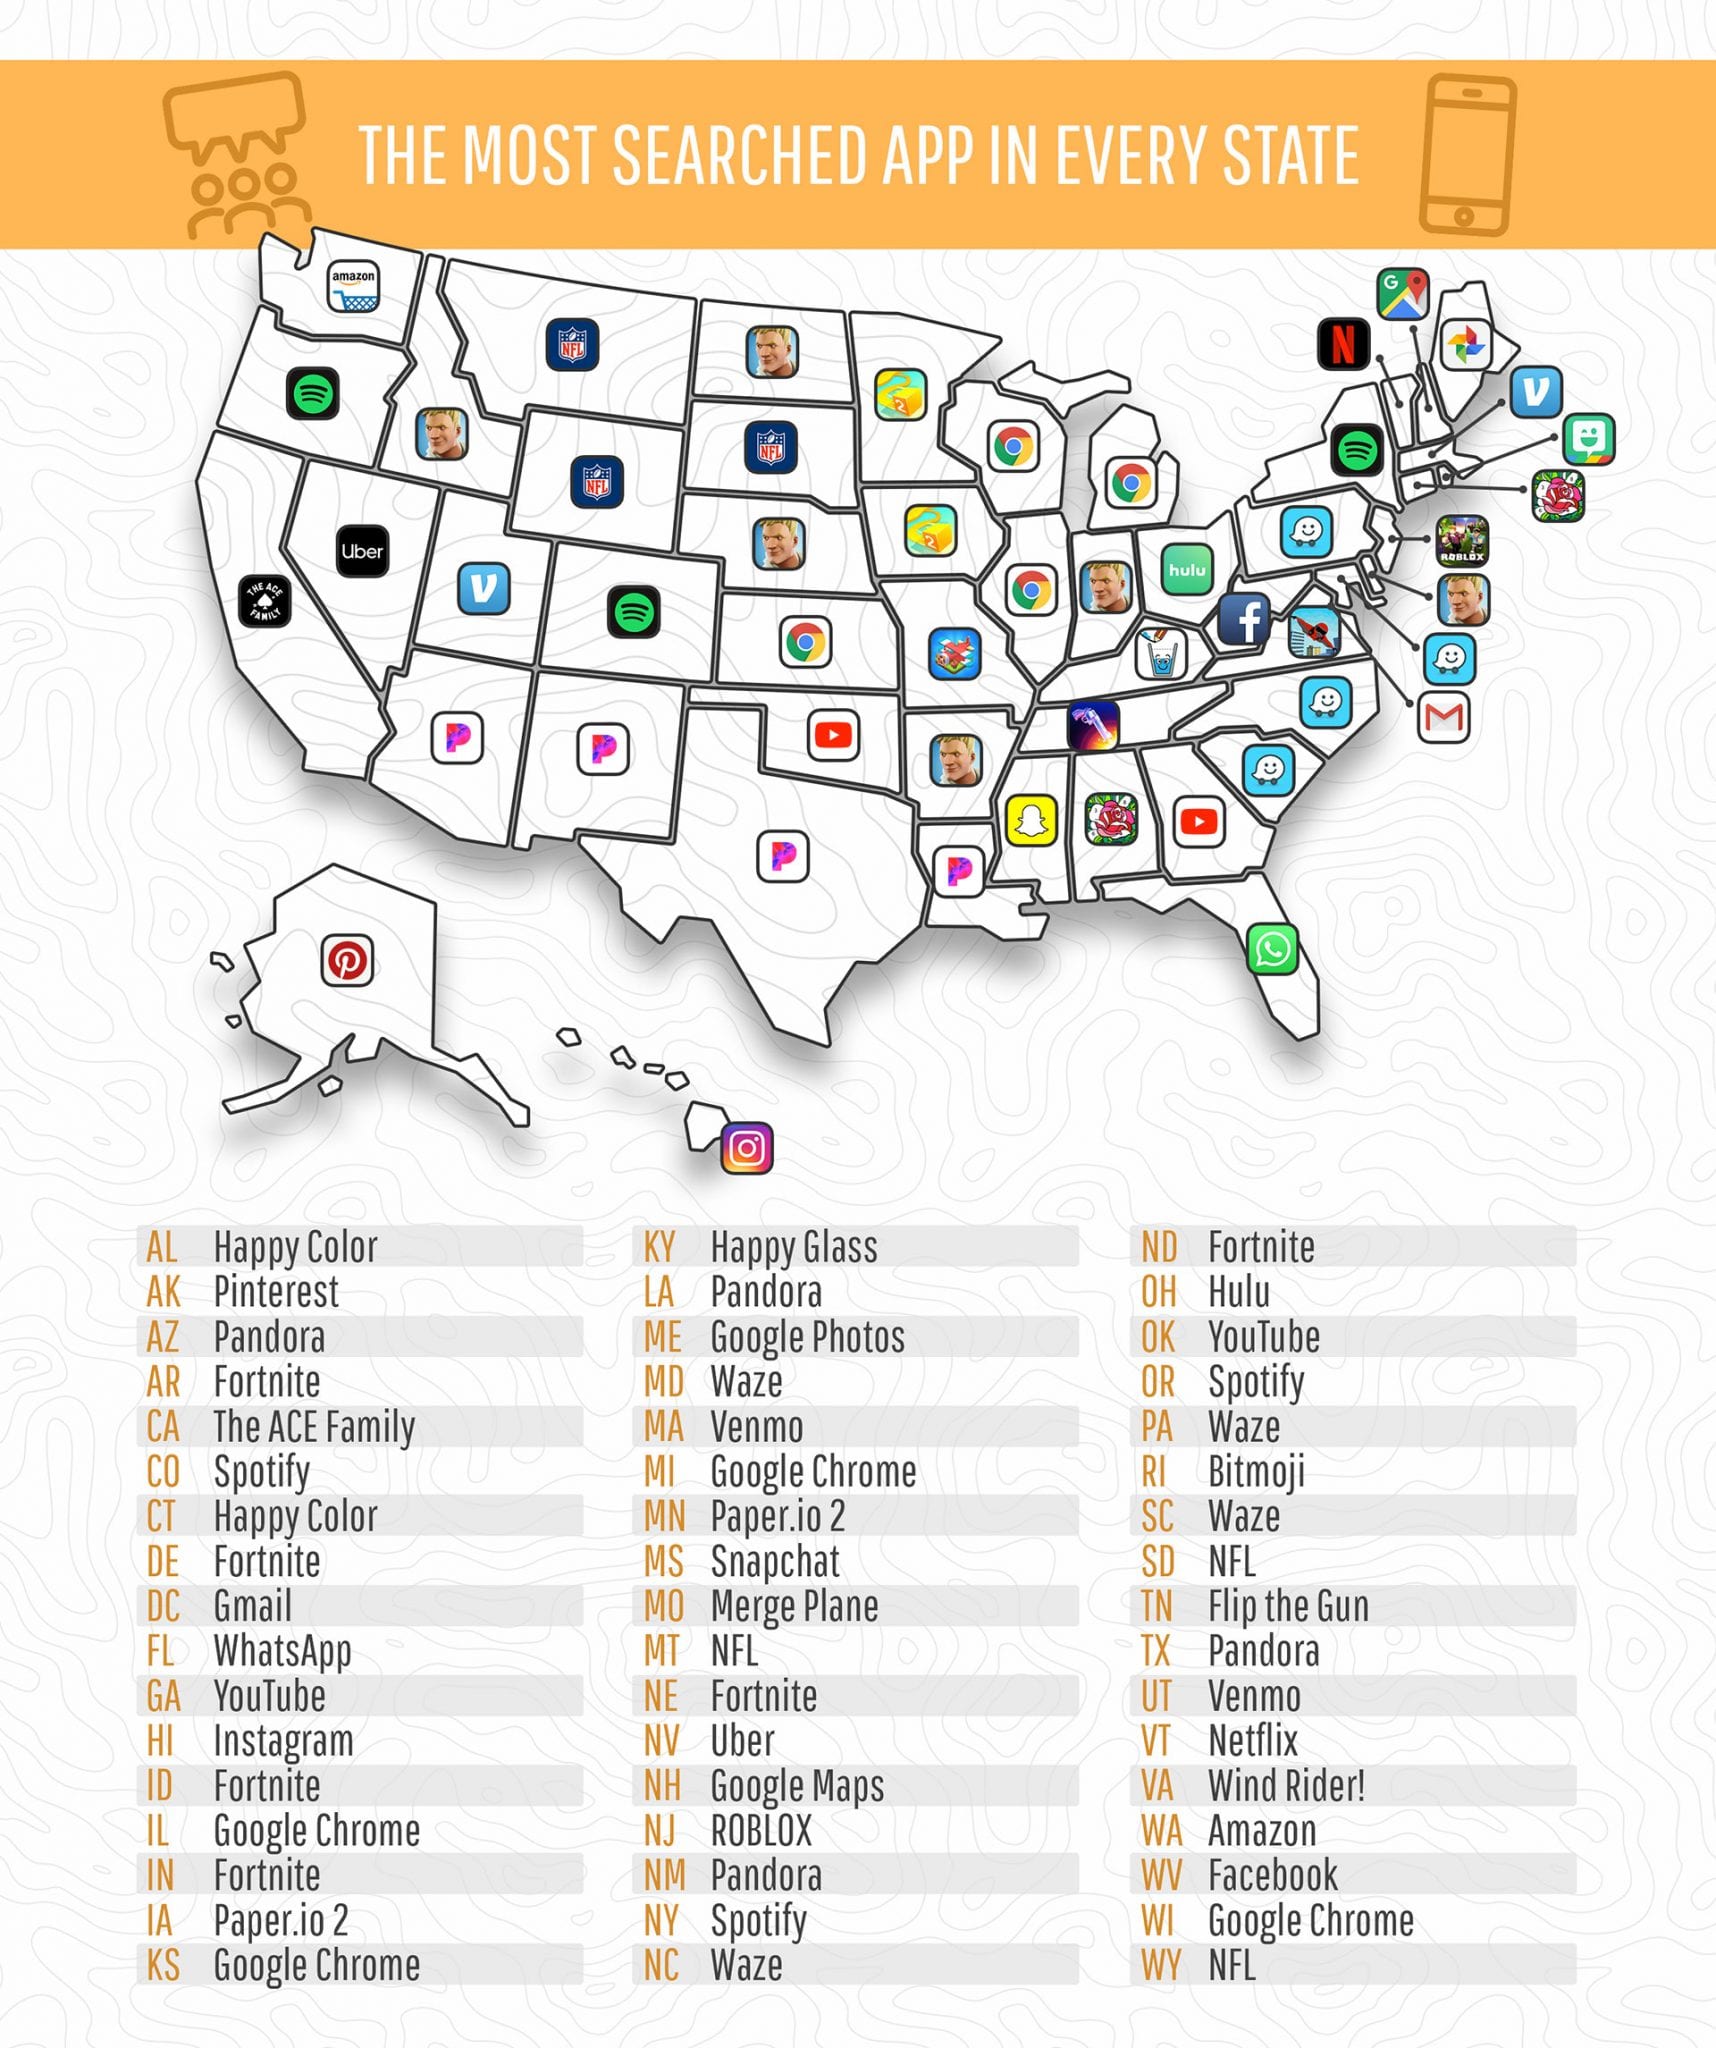 The most searched app in every state map